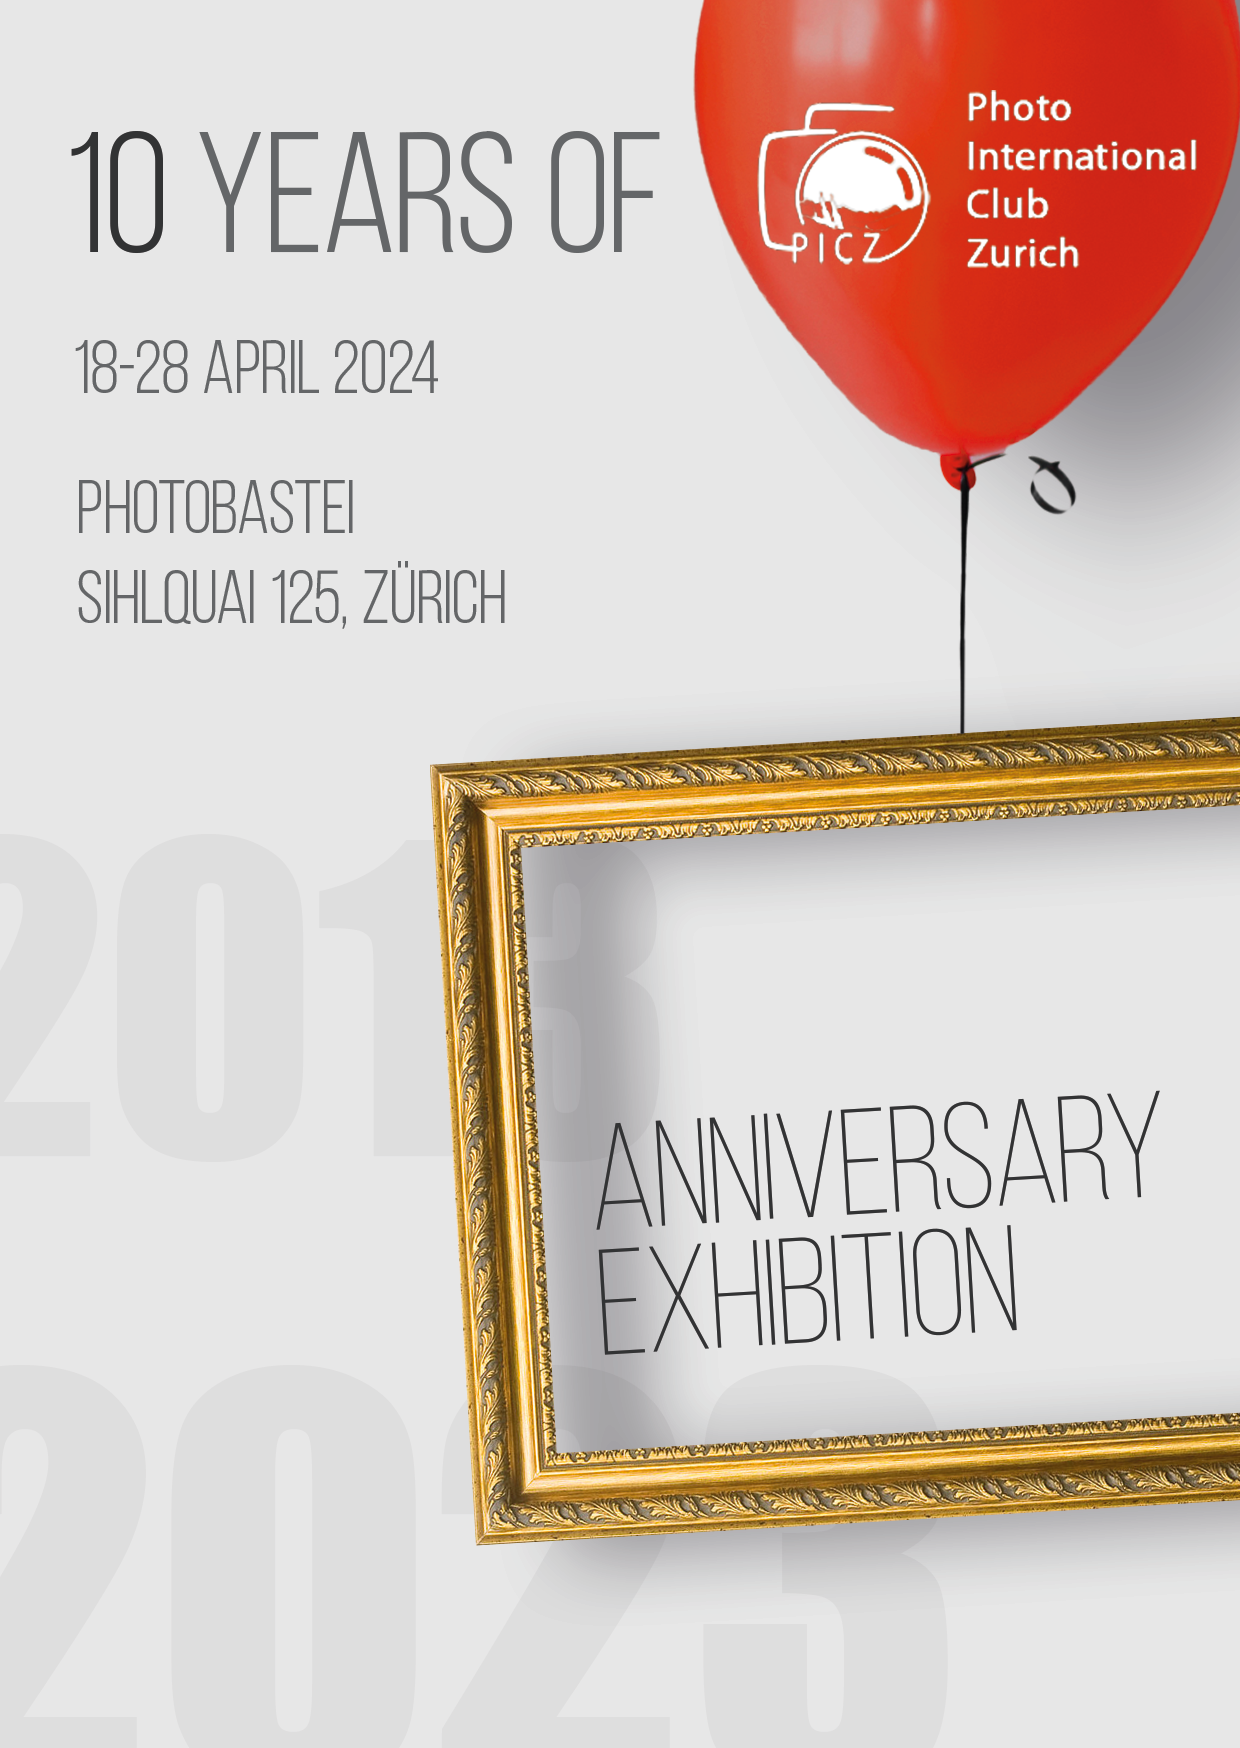 Exhibition Vernissage - PICZ 10th year anniversary